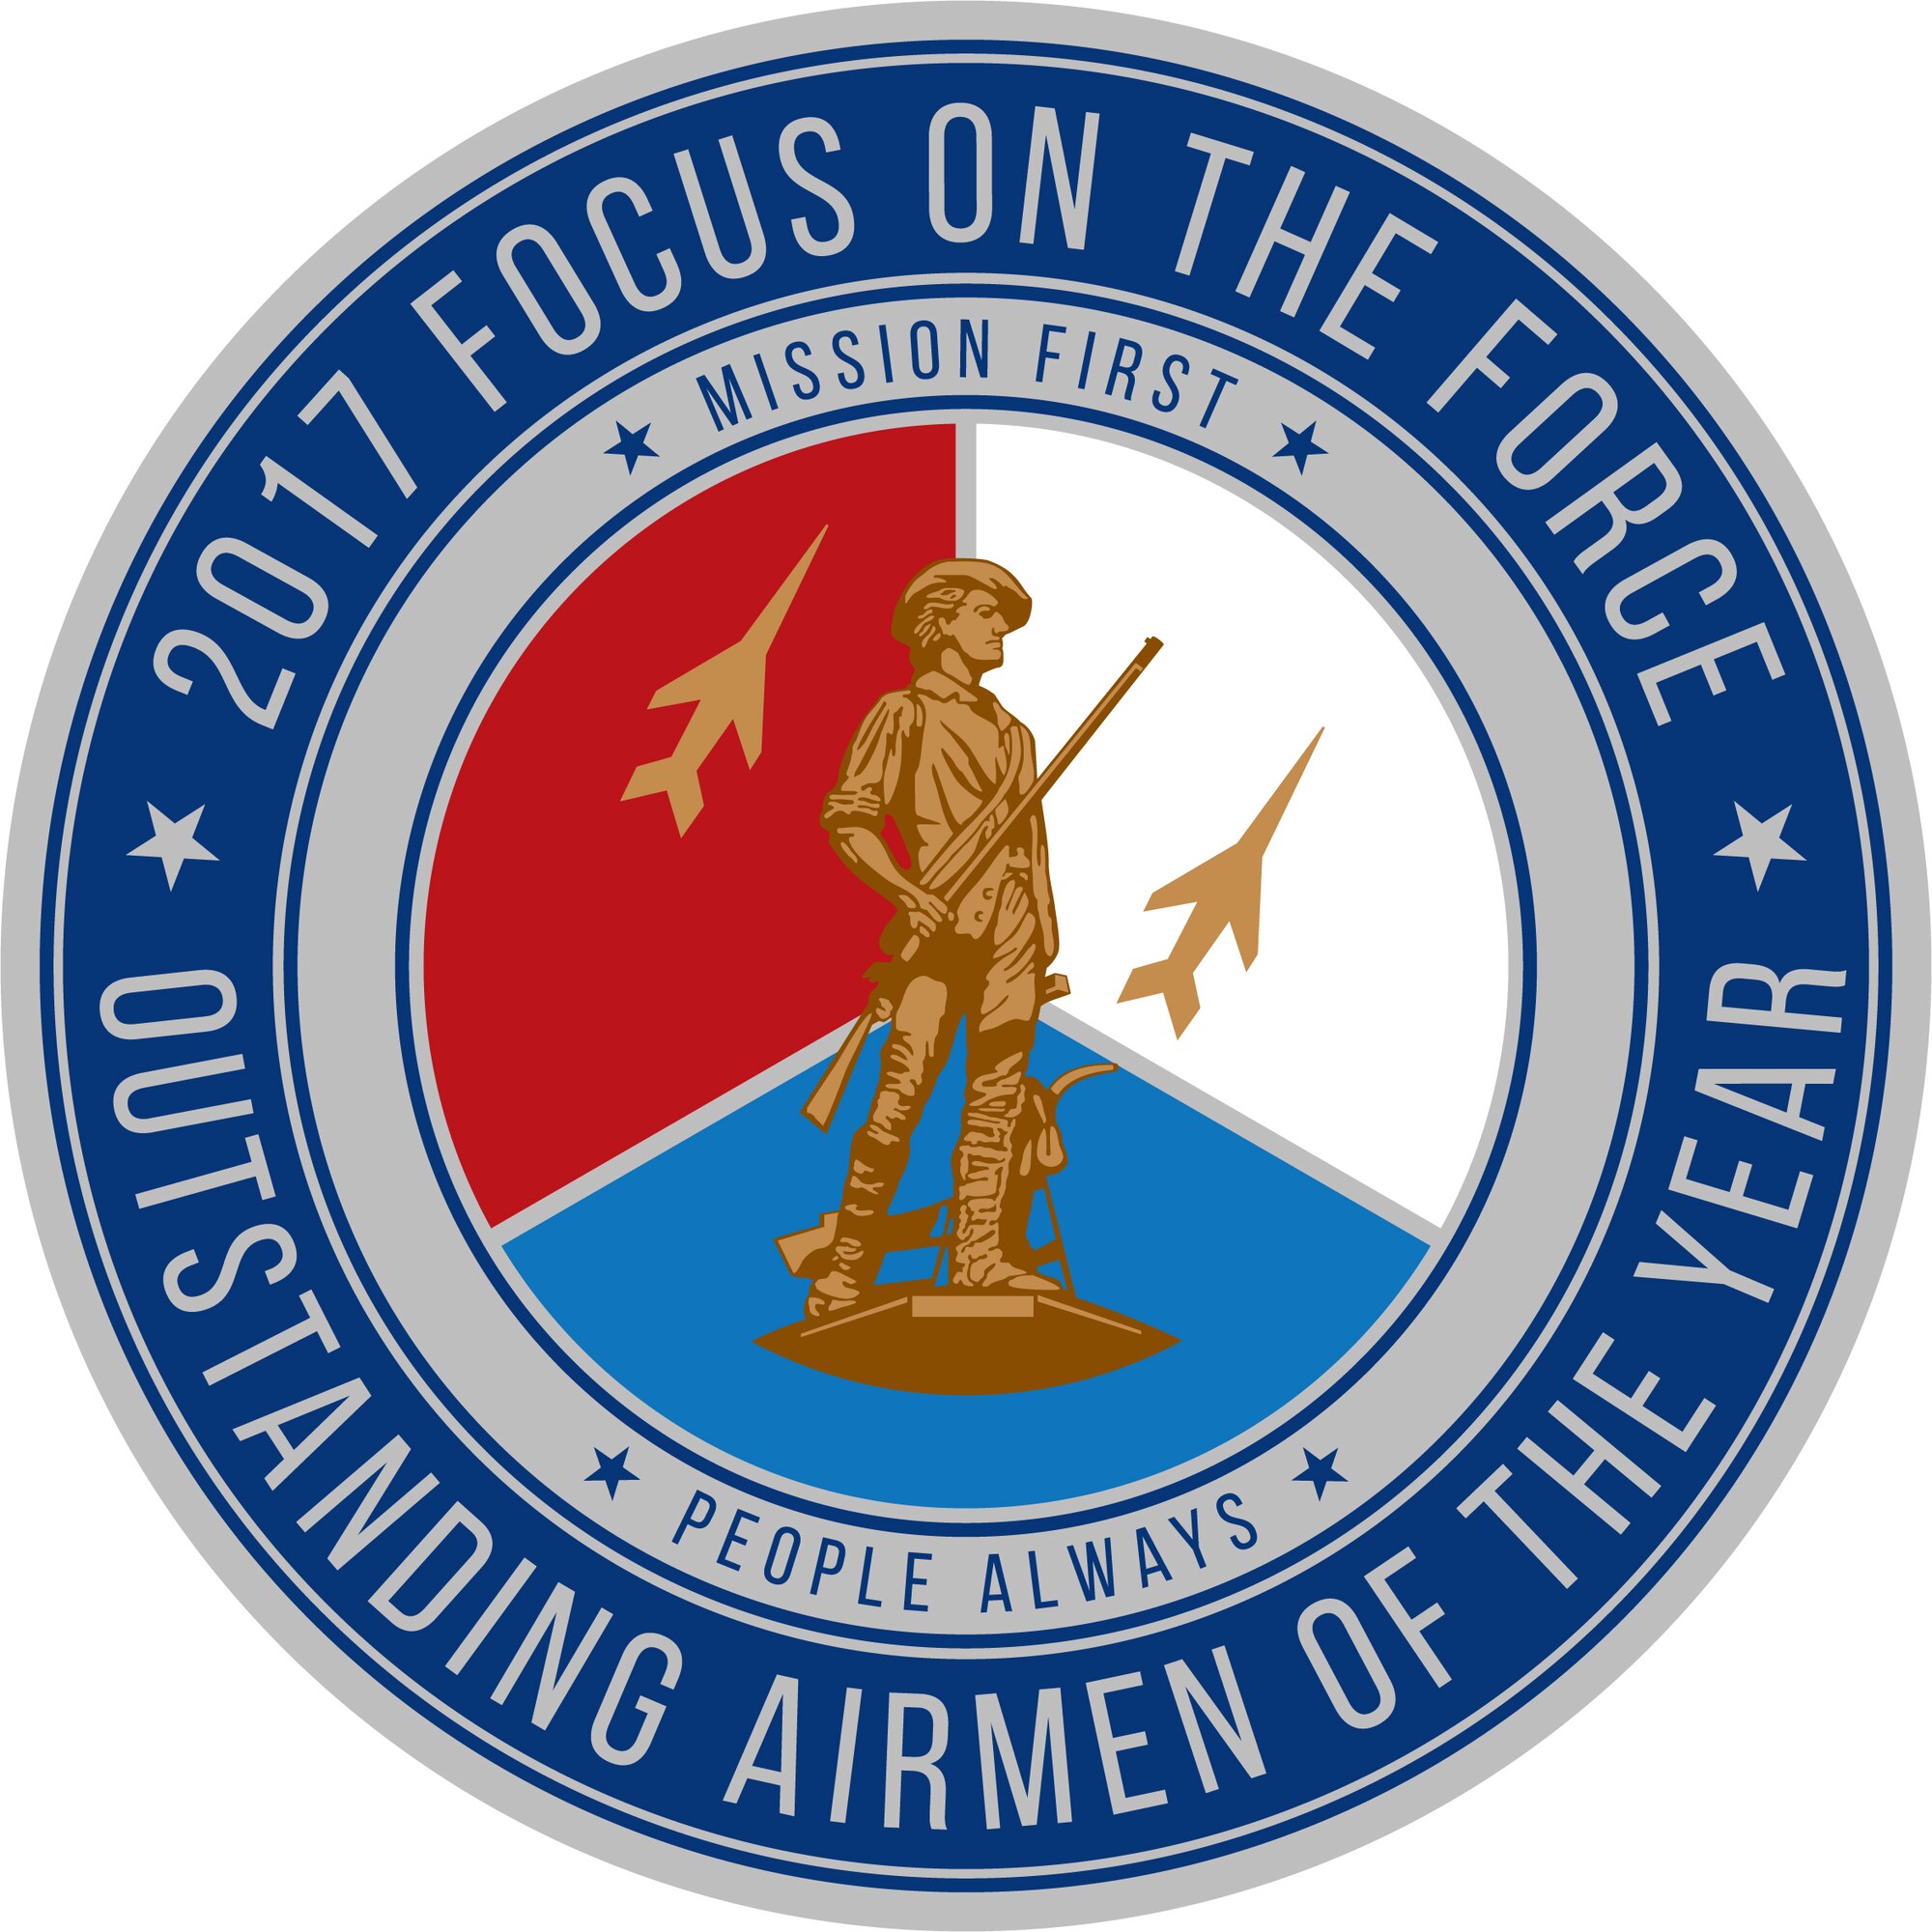 Official seal for the Air National Guard's 2017 Focus on the Force Week, a week-long event celebrating the contributions and excellence of the ANG enlisted corps.